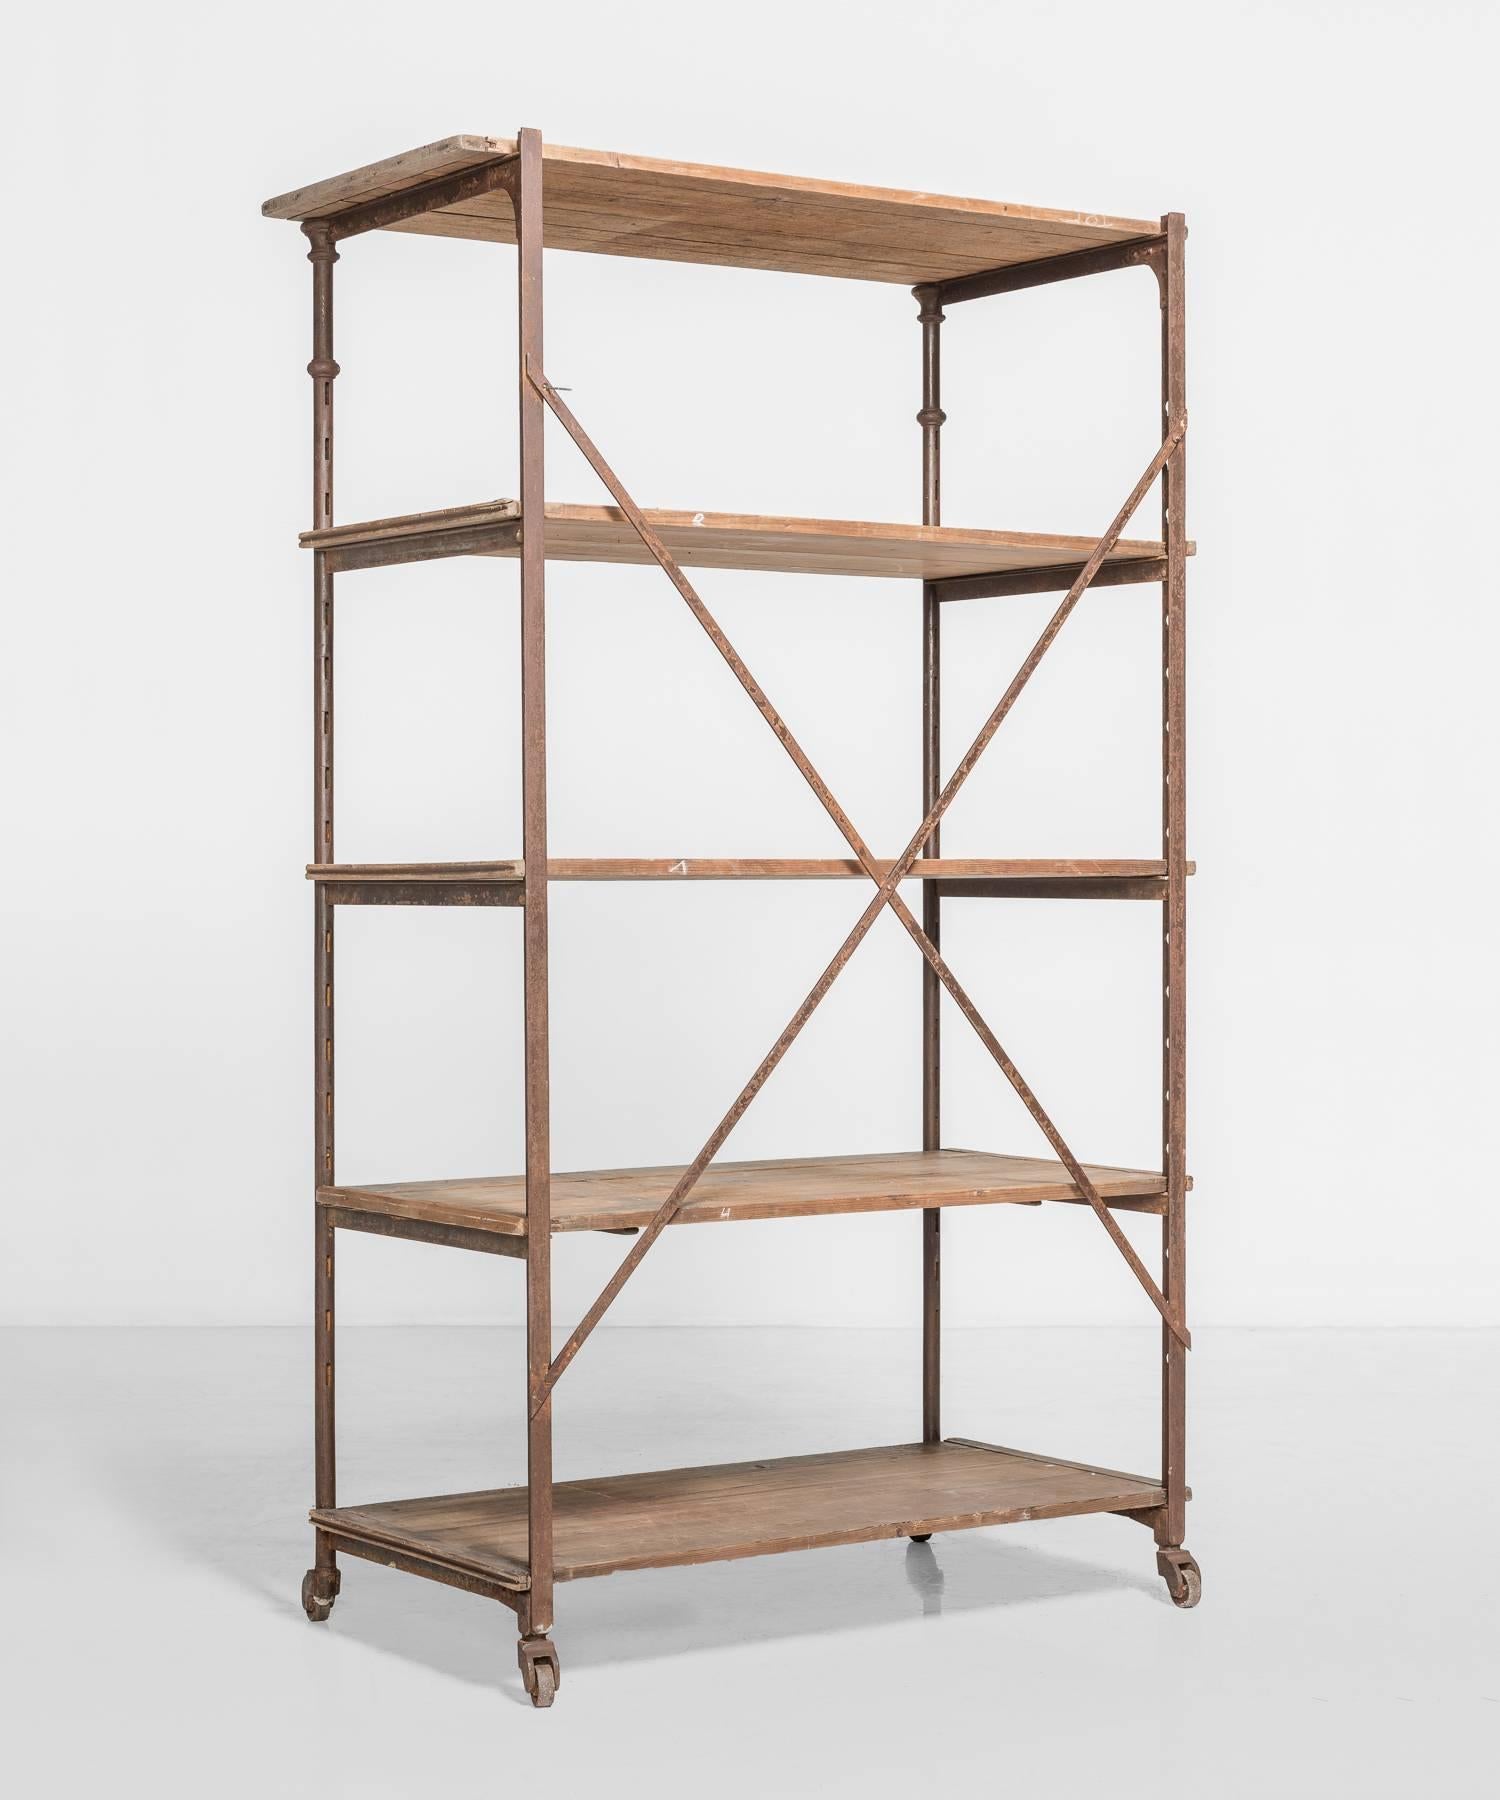 French Theodore Scherf Oak and Iron Shelving Unit, circa 1900